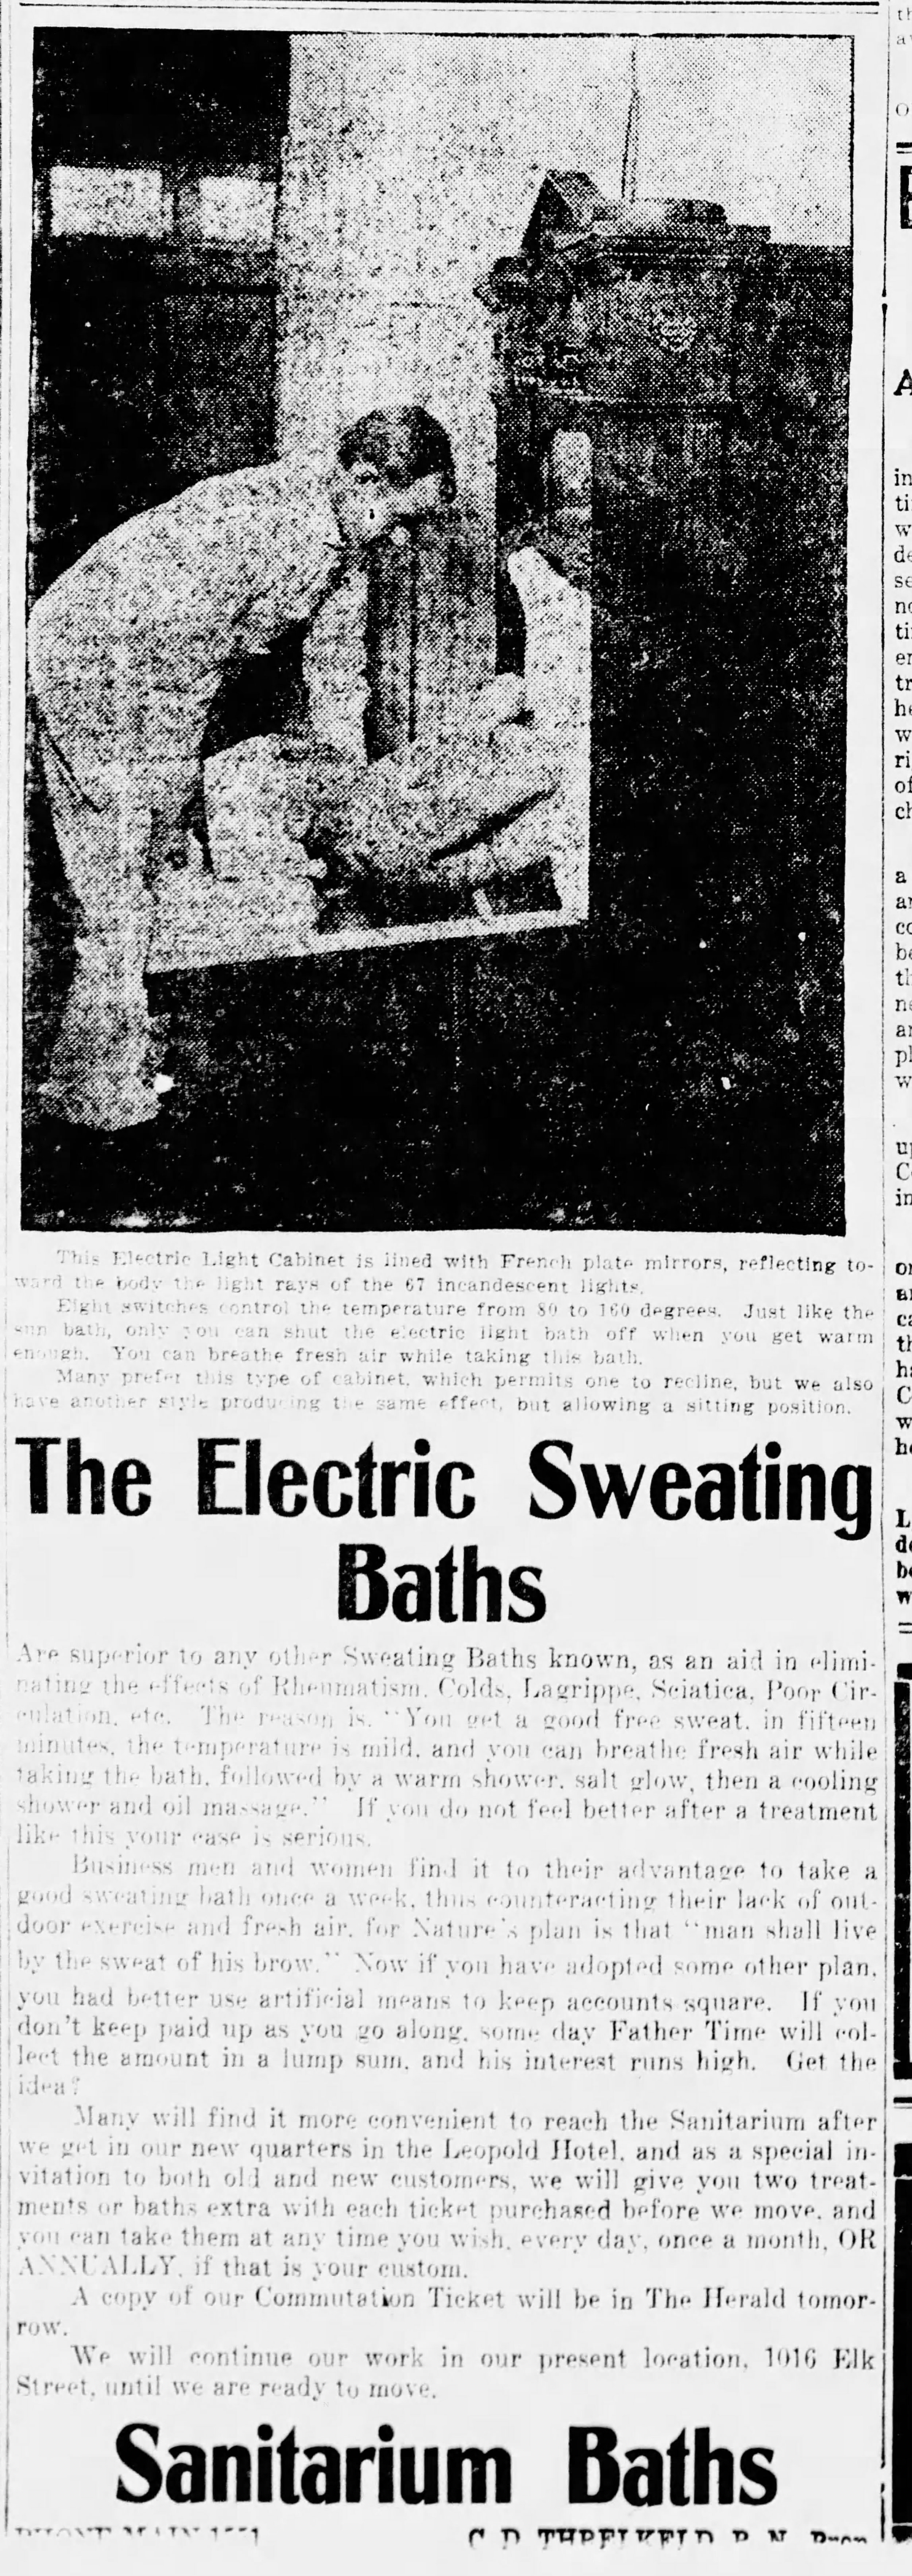 The Elctric Sweating Baths advertisement